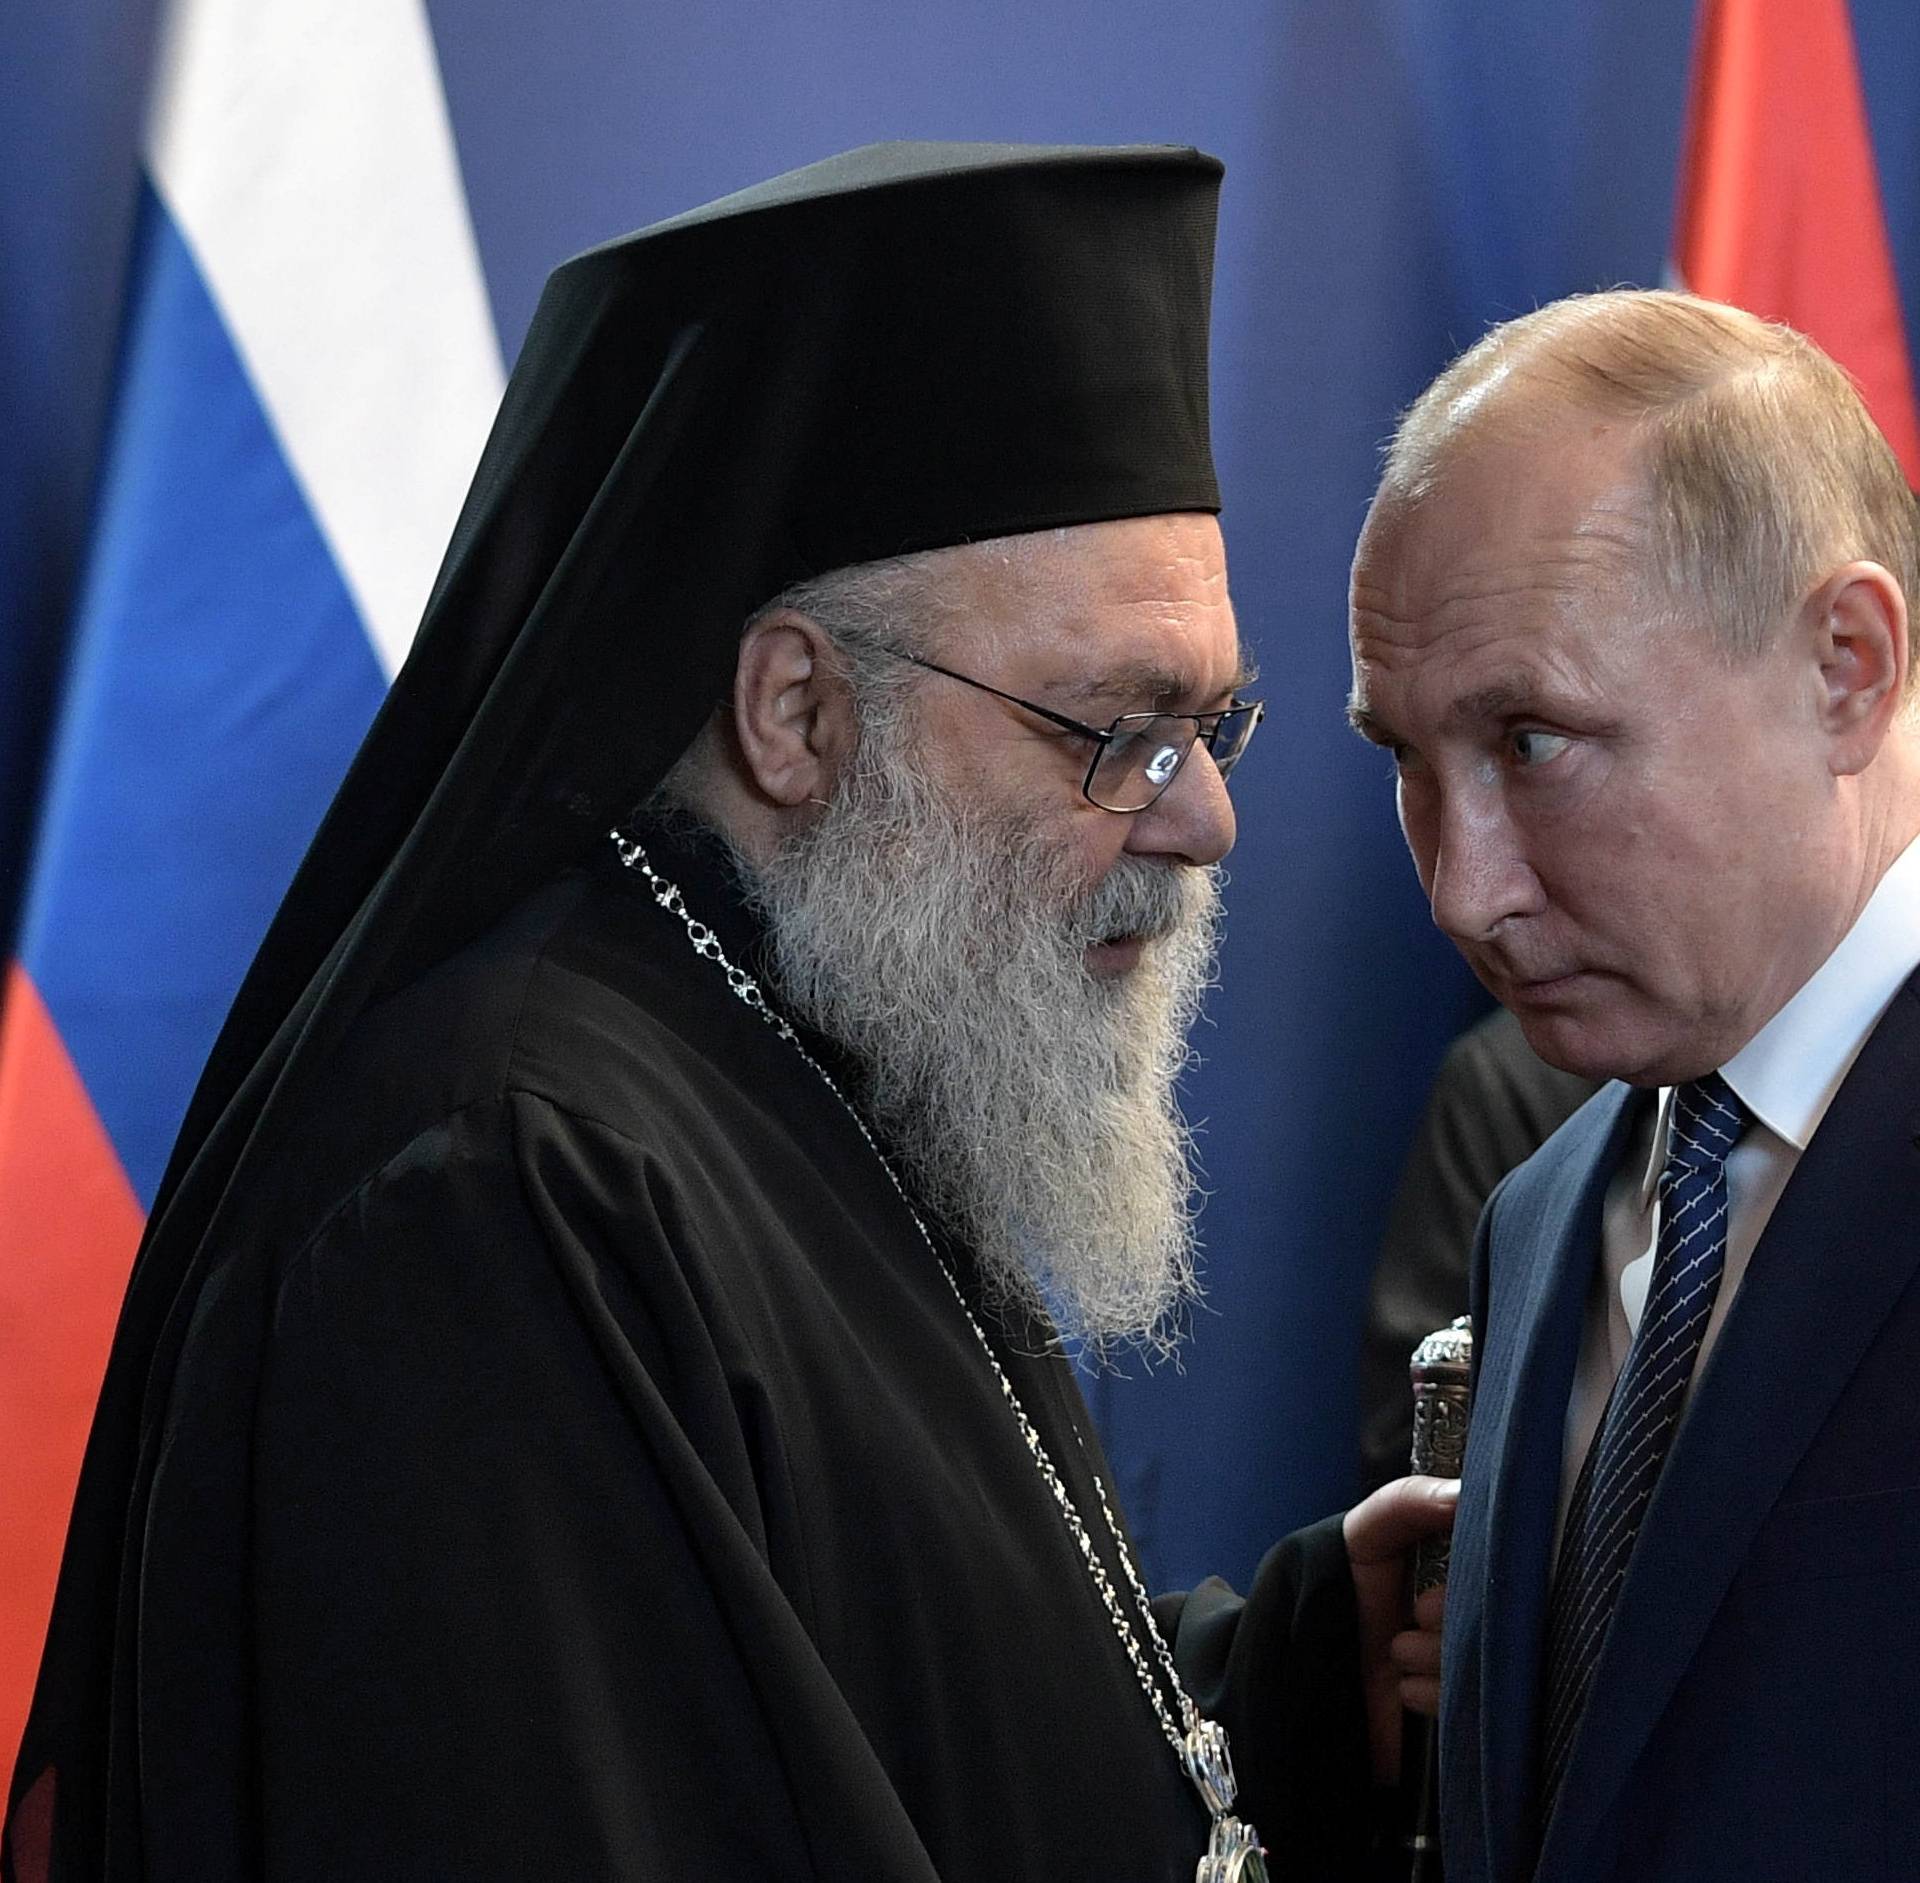 Russian President Vladimir Putin meets with heads of the Christian Churches of the Middle East in Budapest